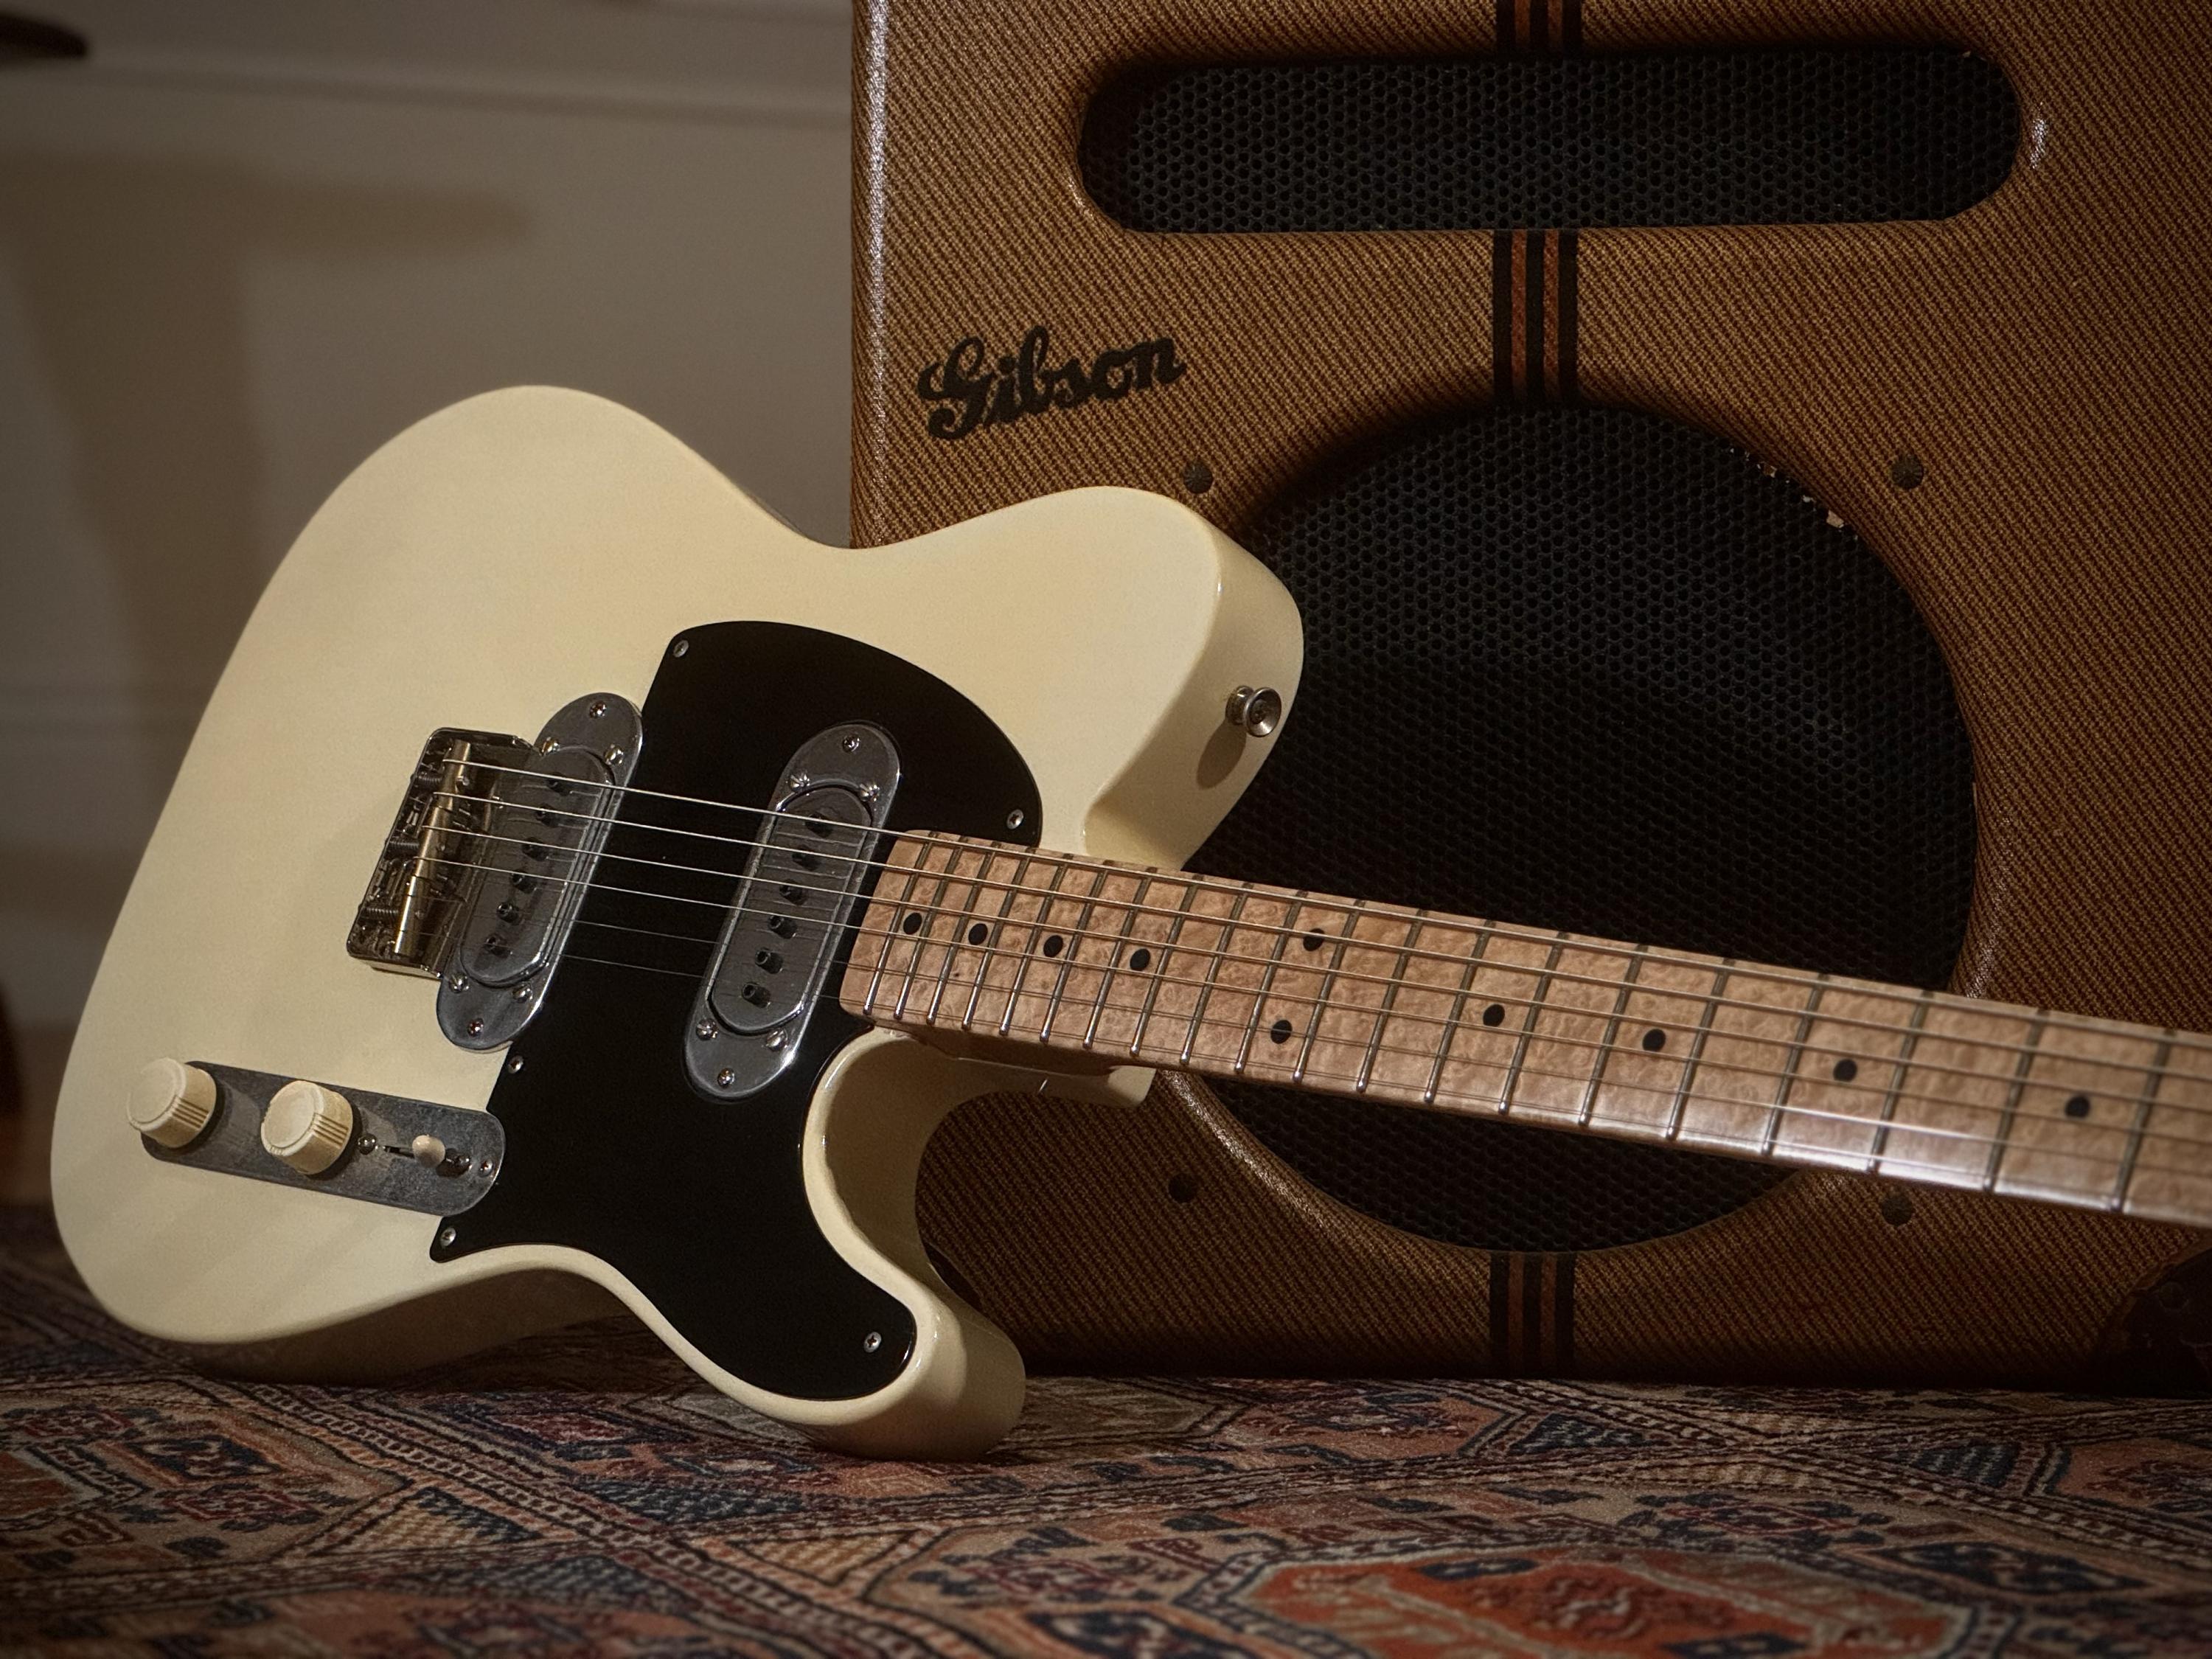 Telecaster Love Thread, No Archtops Allowed-img_9662-jpg